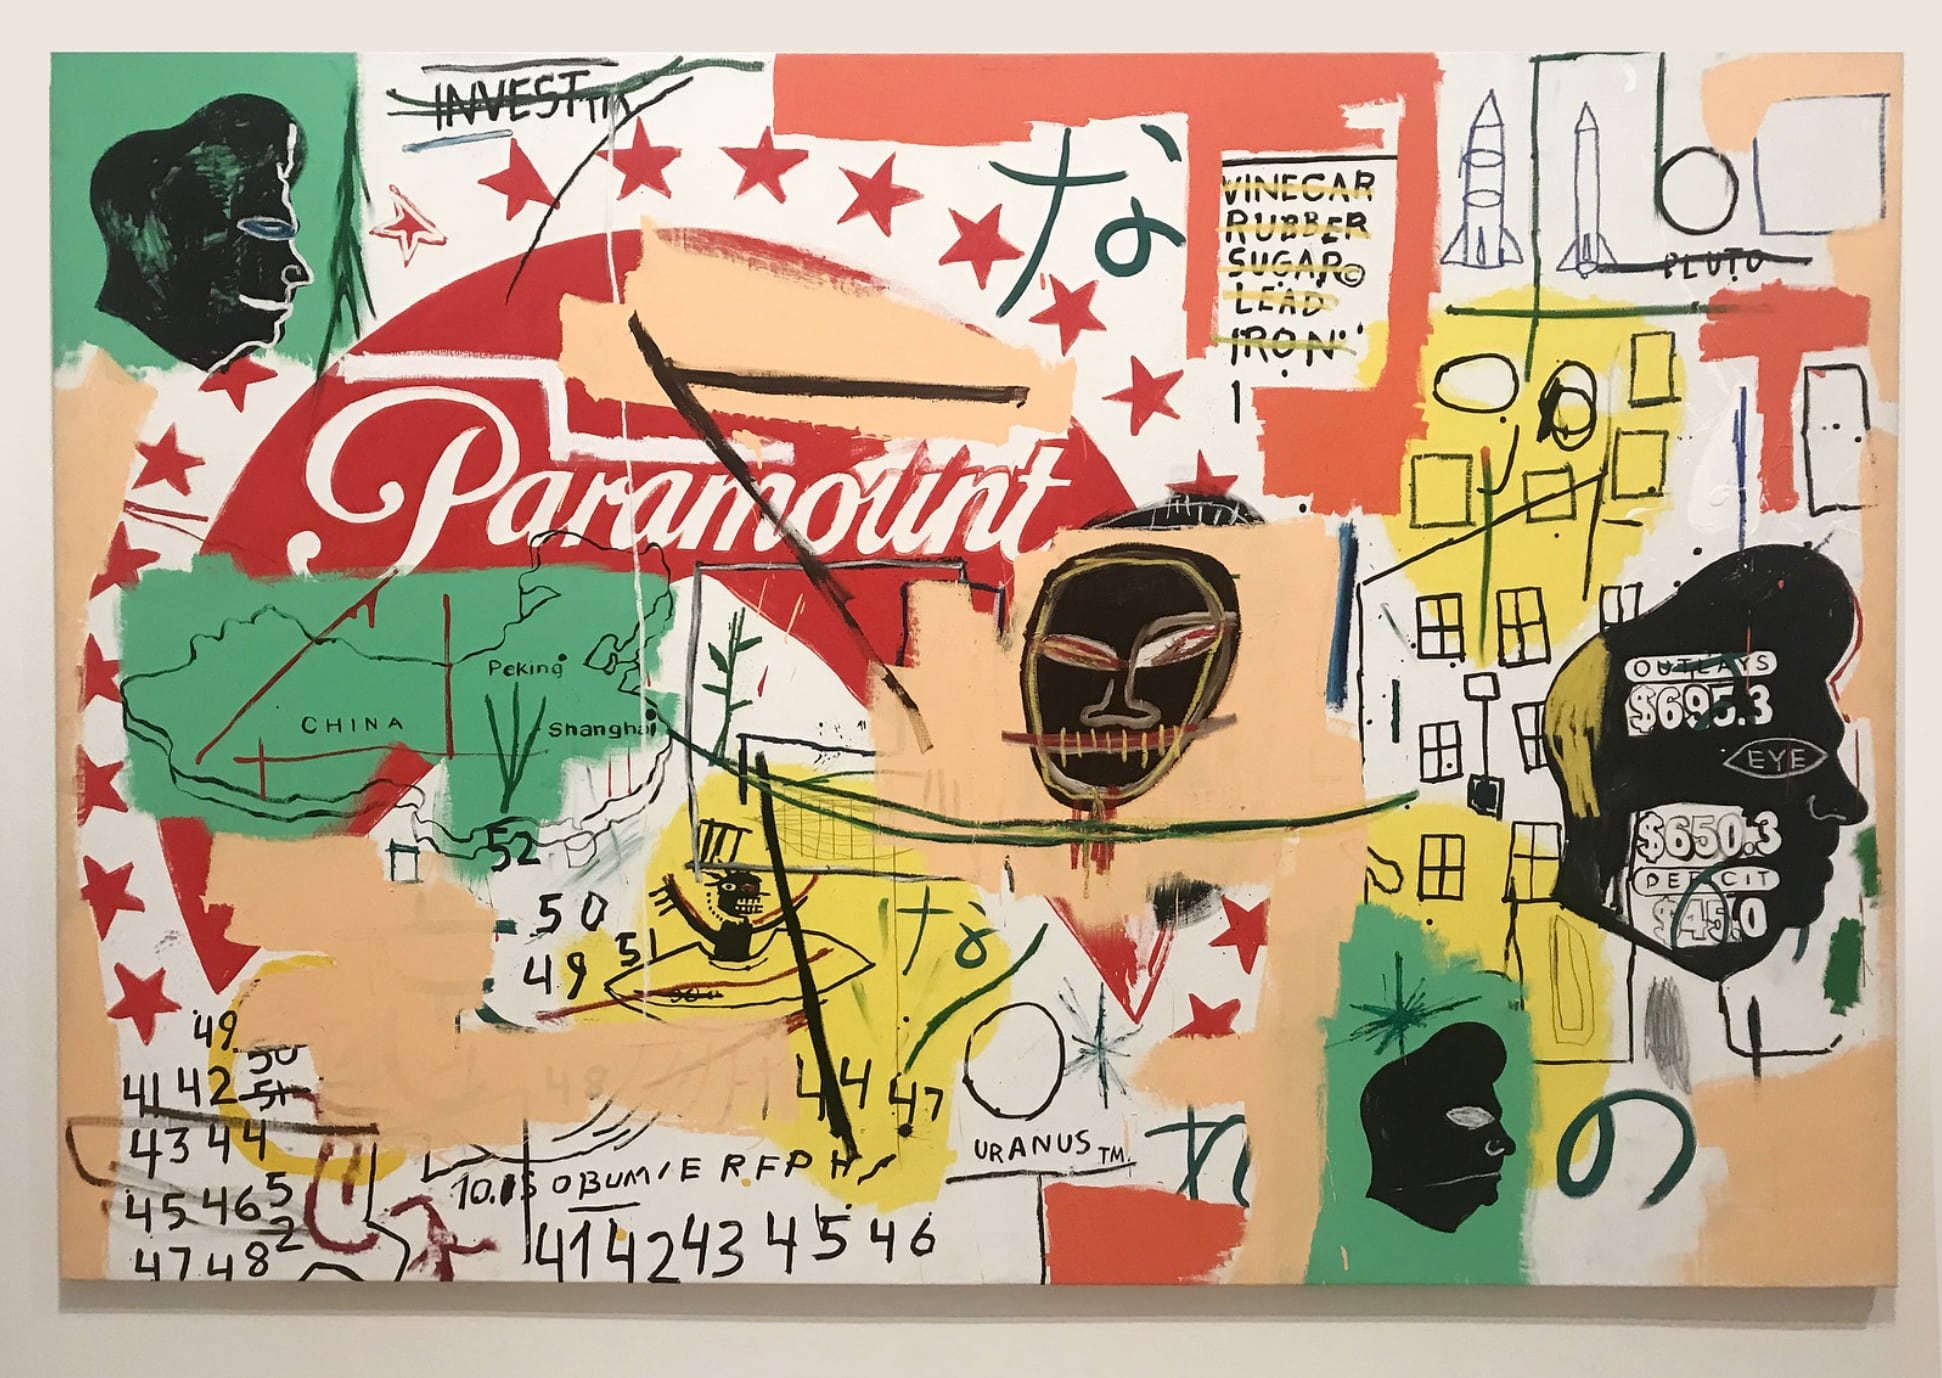 Paramount by Andy Warhol and Jean-Michel Basquiat (1985)